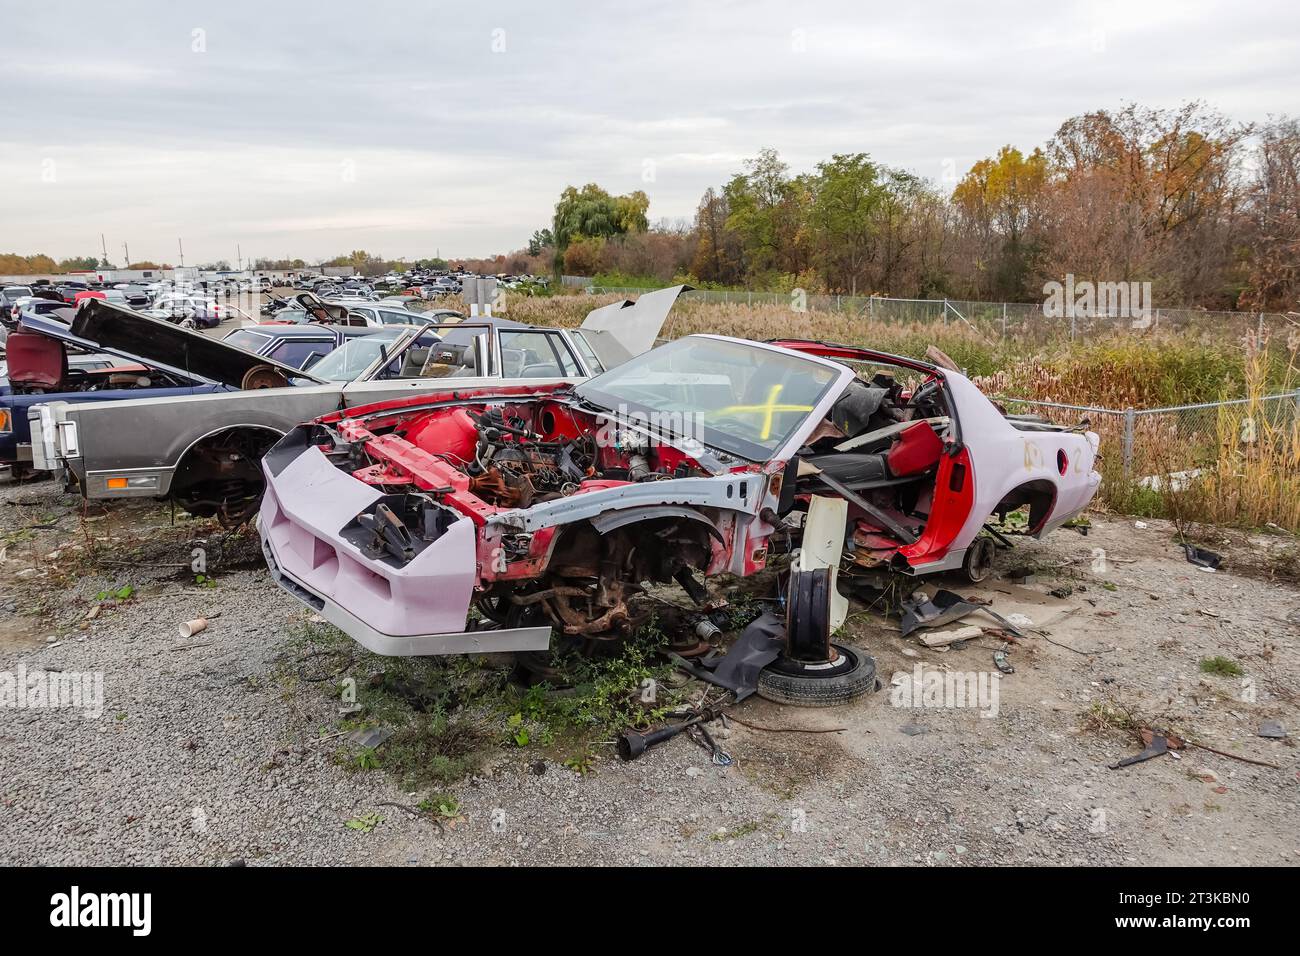 An old and disassembled American sports coupe in a junkyard Stock Photo